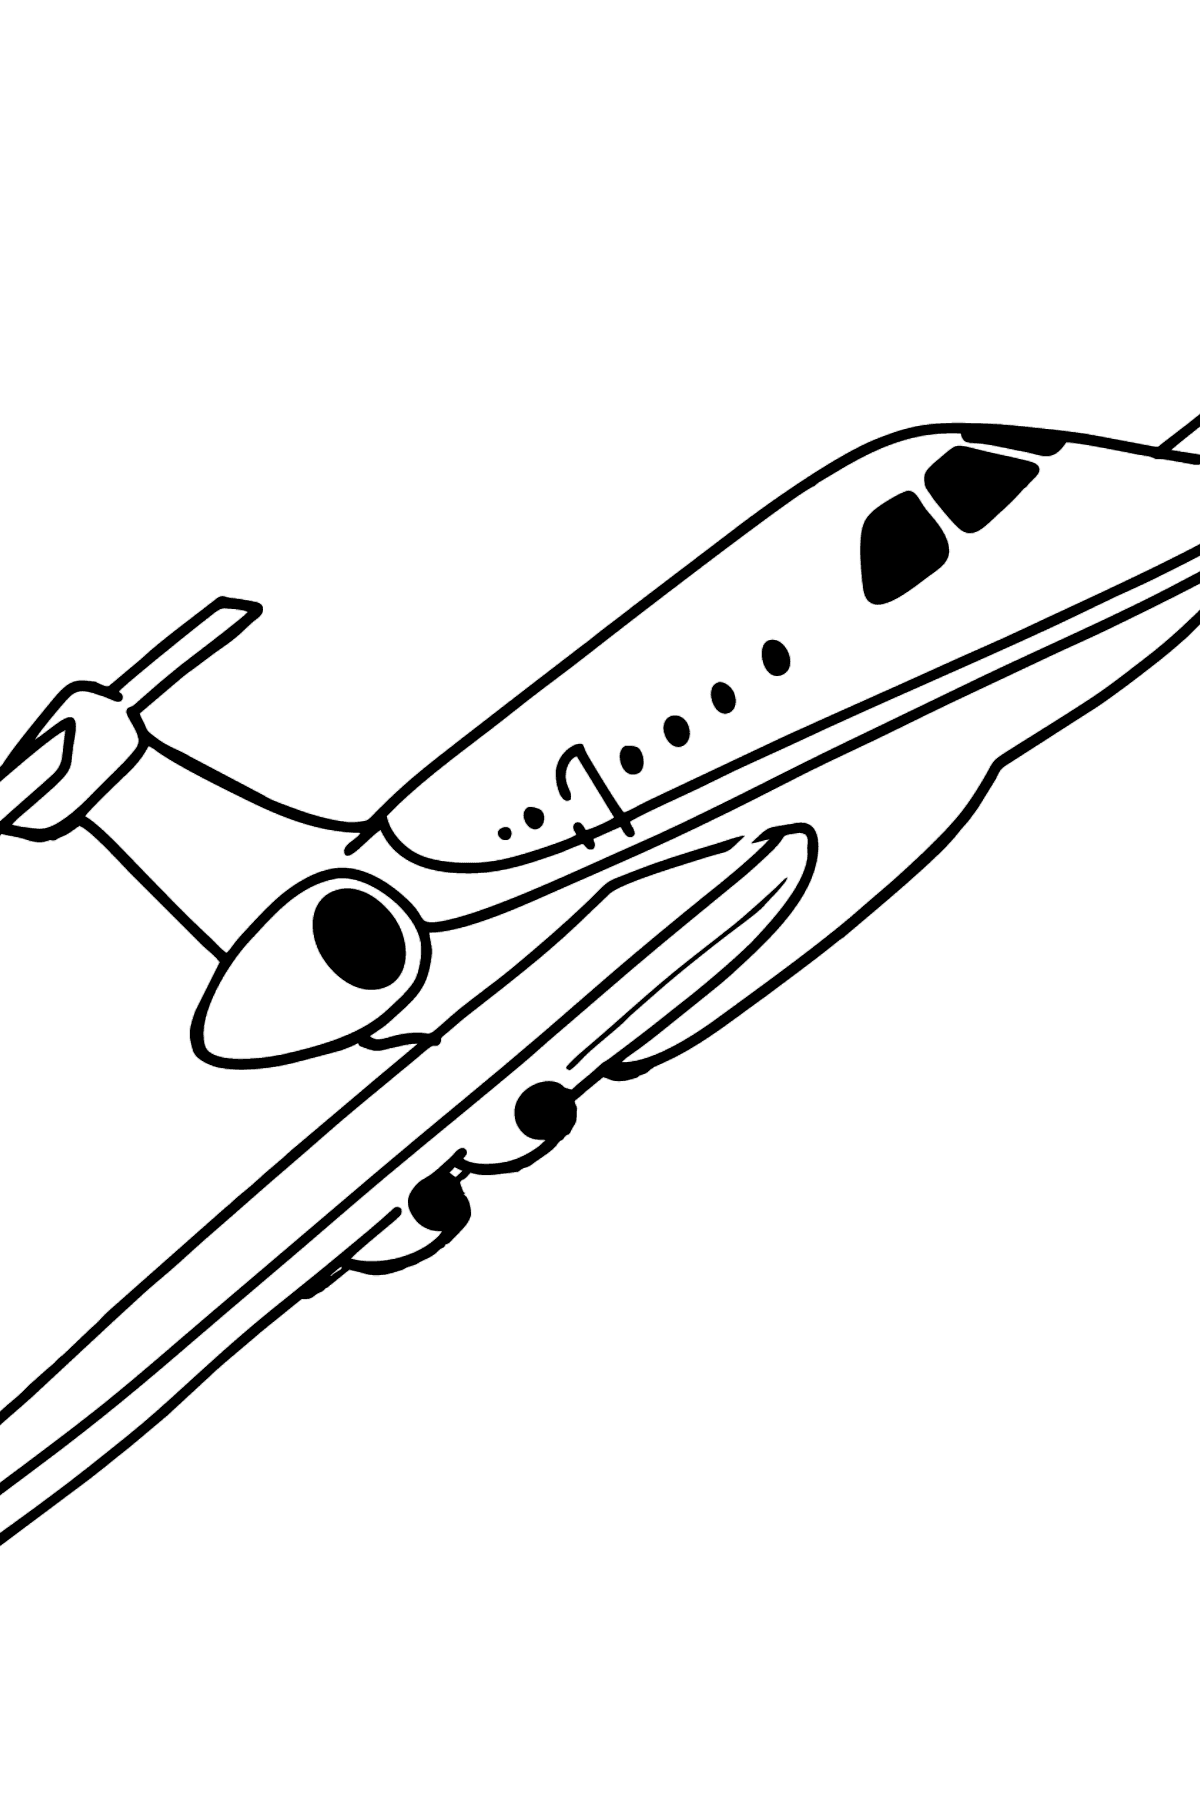 Airbus Airplane coloring page - Coloring Pages for Kids